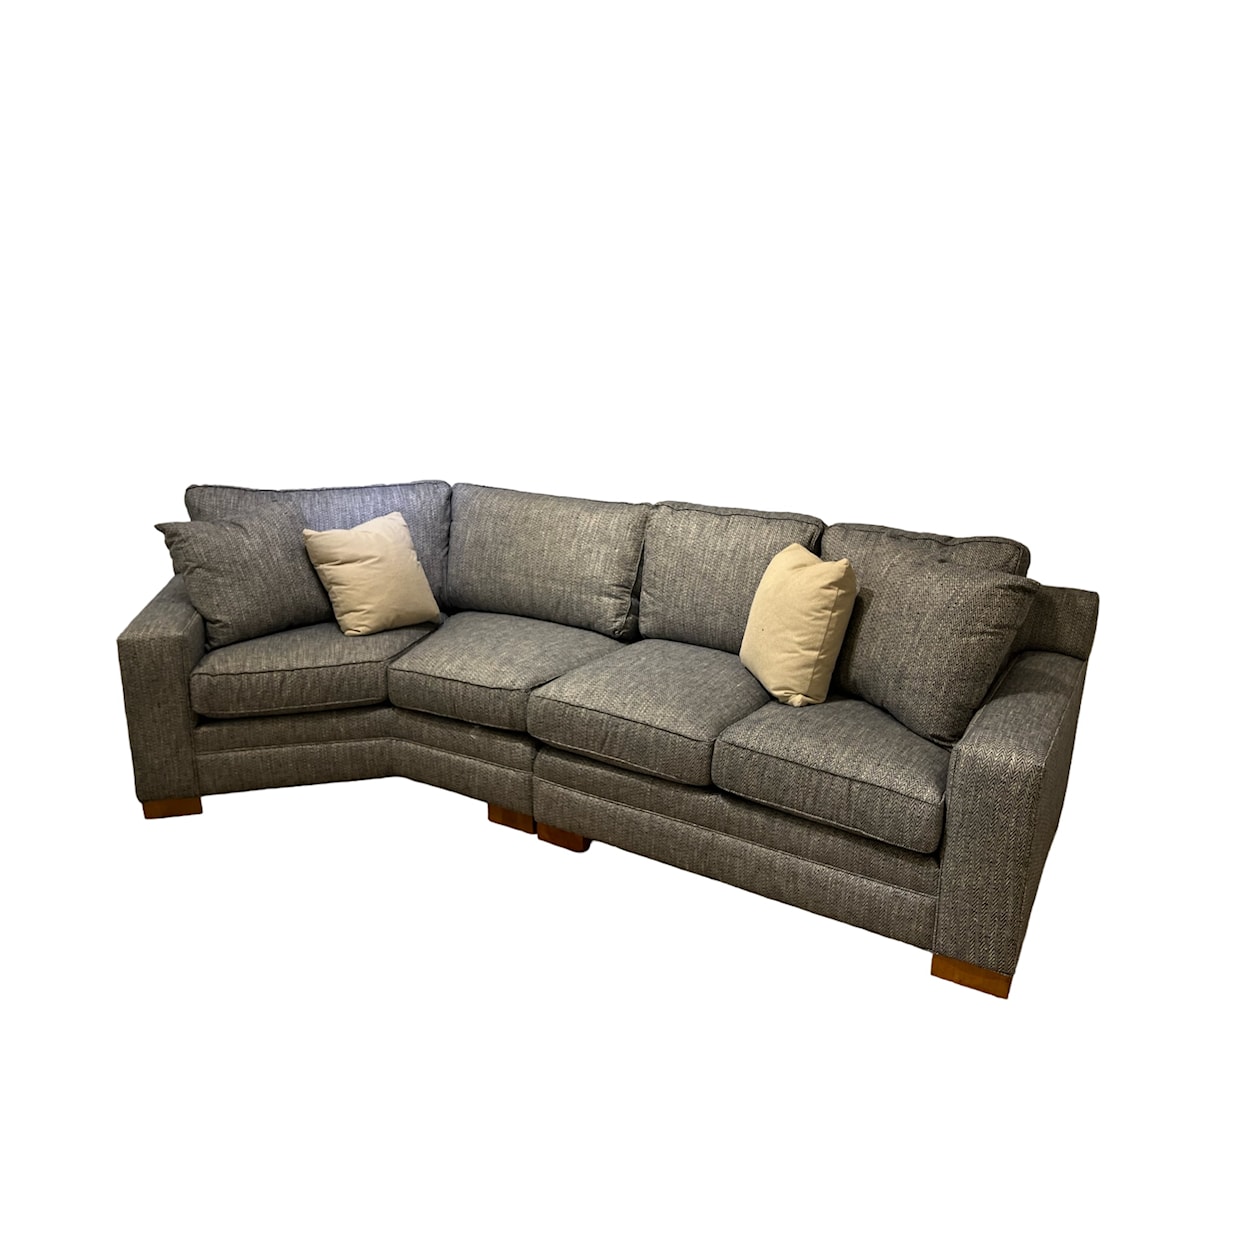 Taylor King Plush Two Piece Sectional